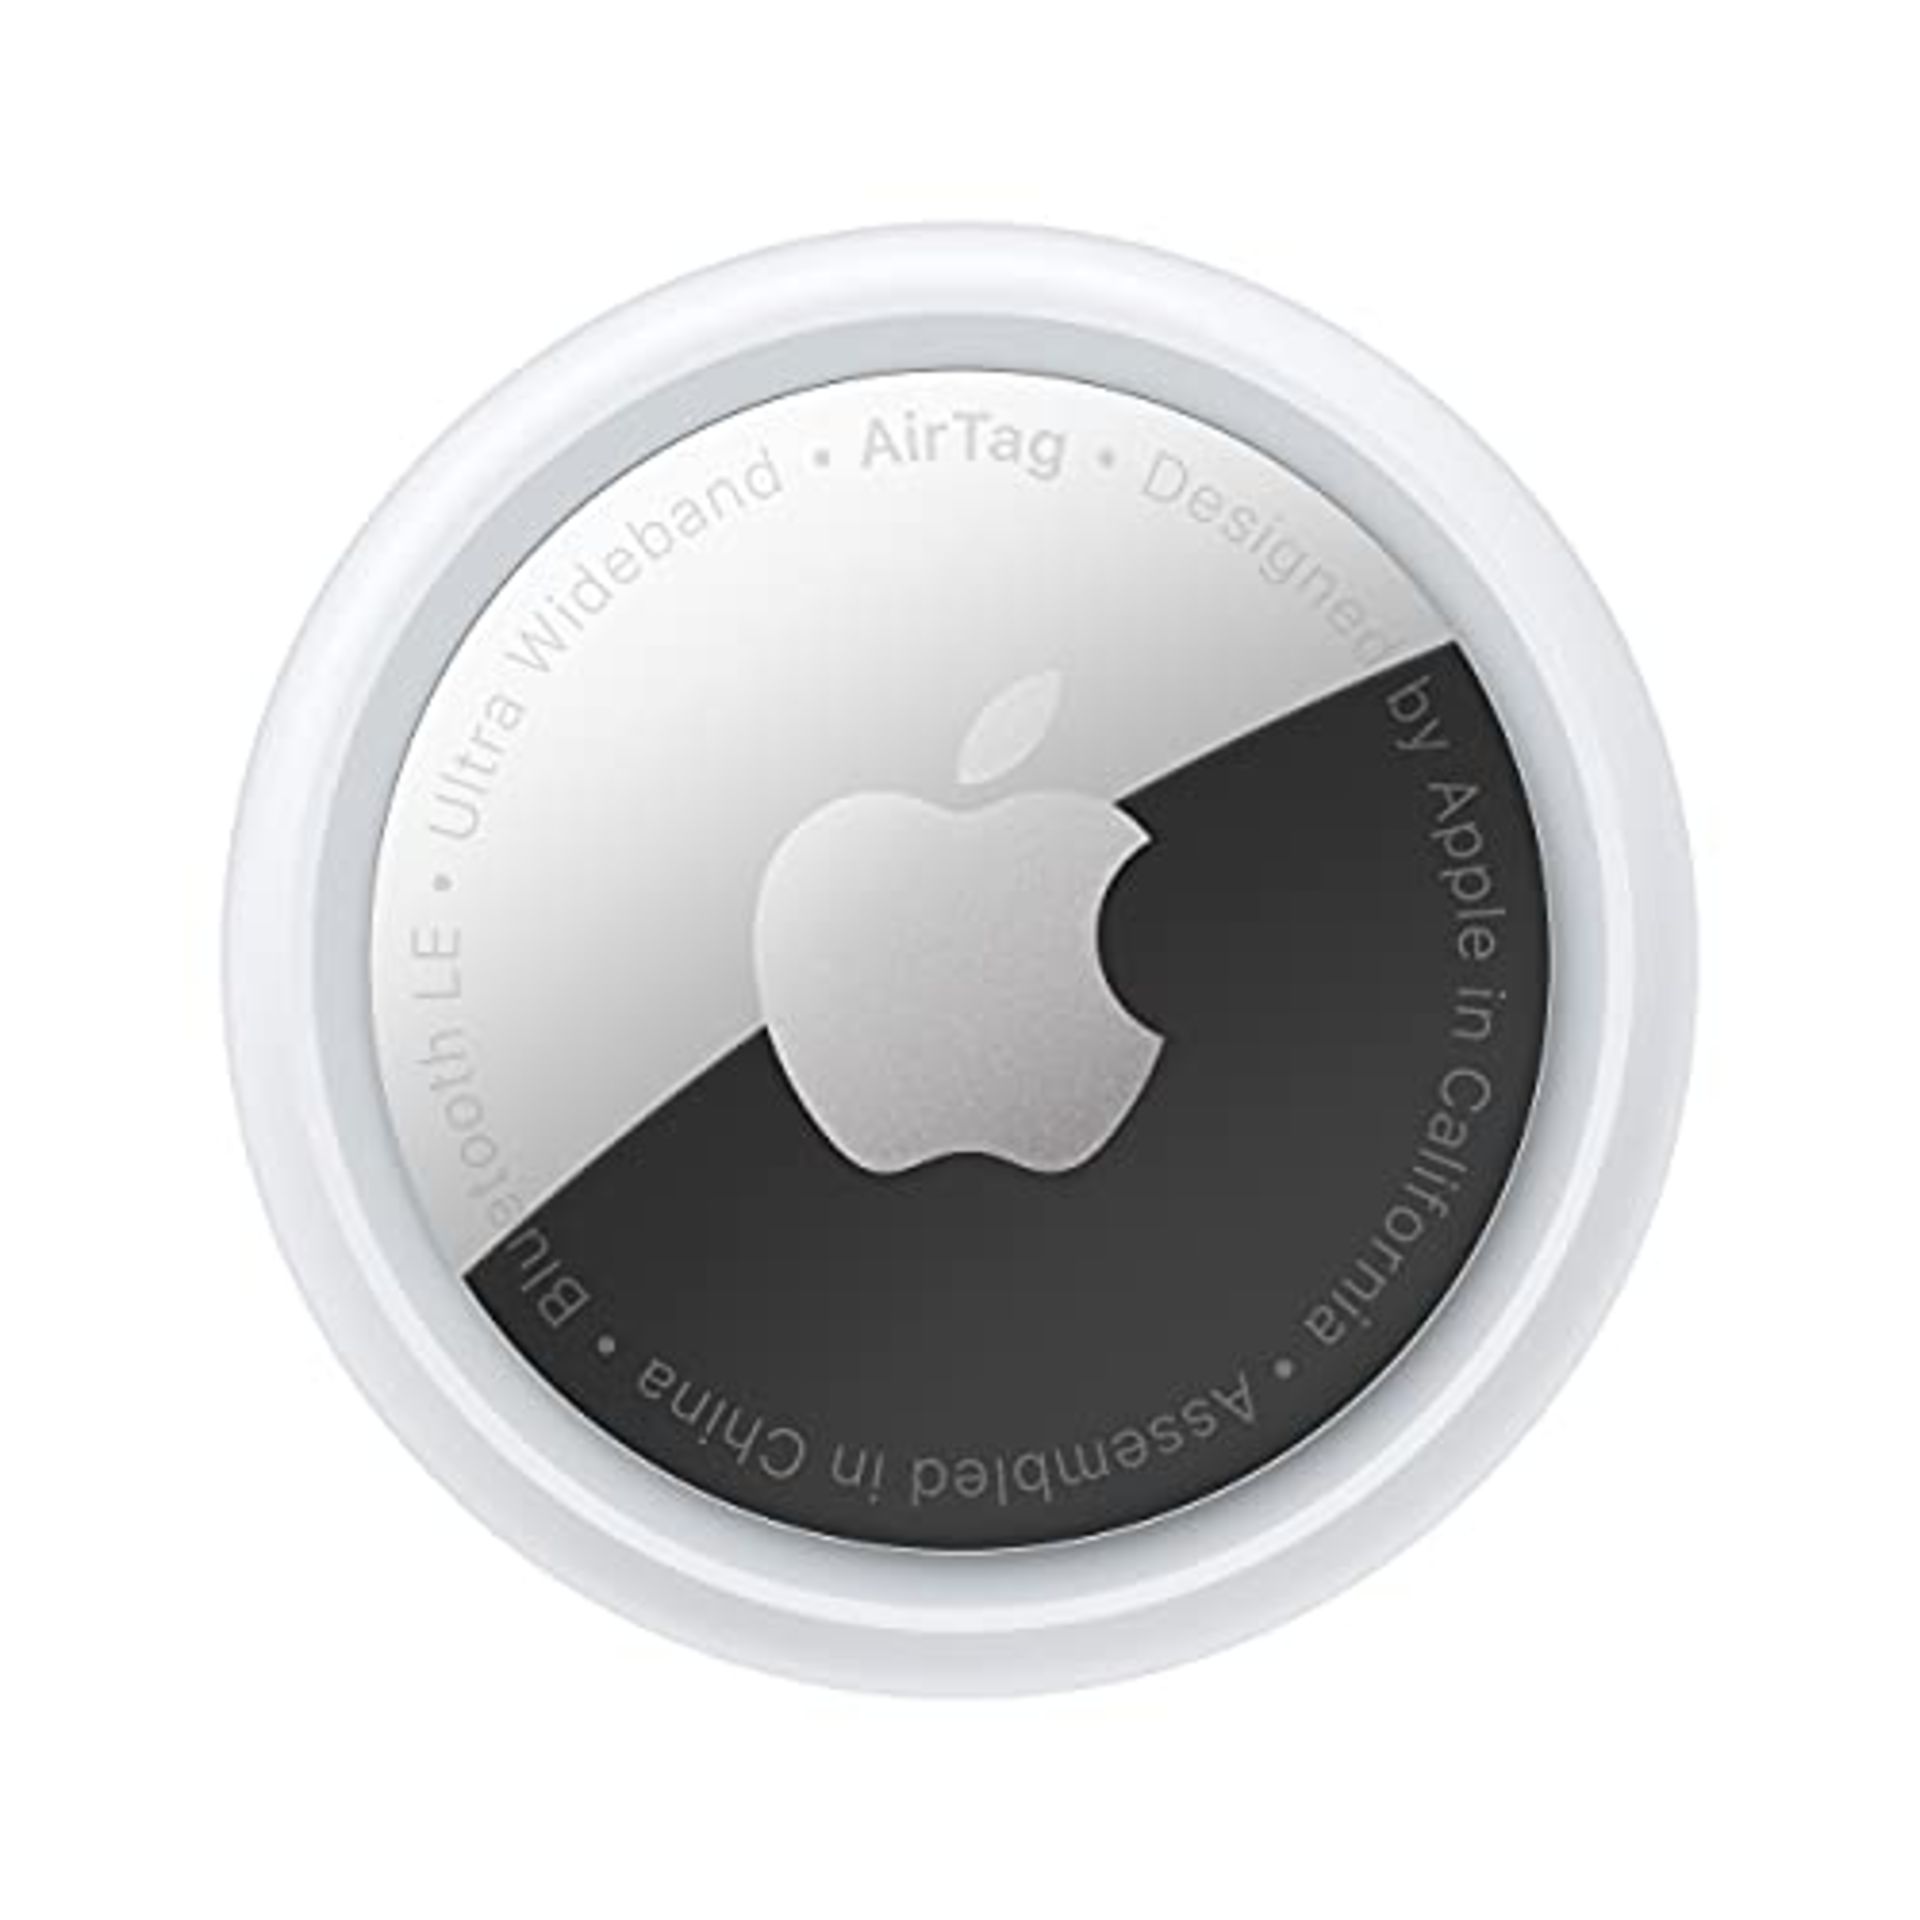 Apple AirTag - Image 3 of 4